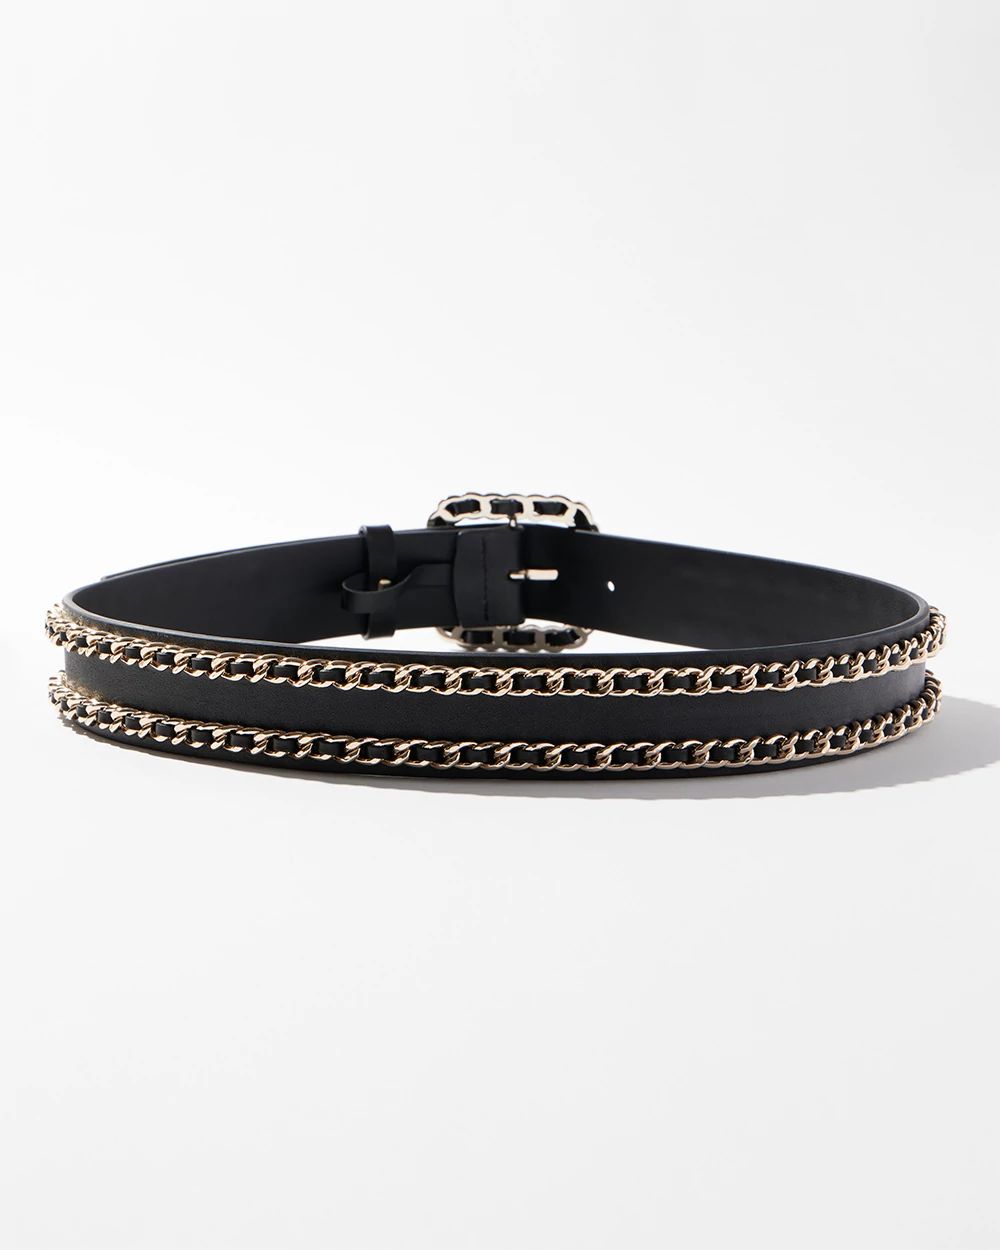 Double Chain Leather Belt click to view larger image.